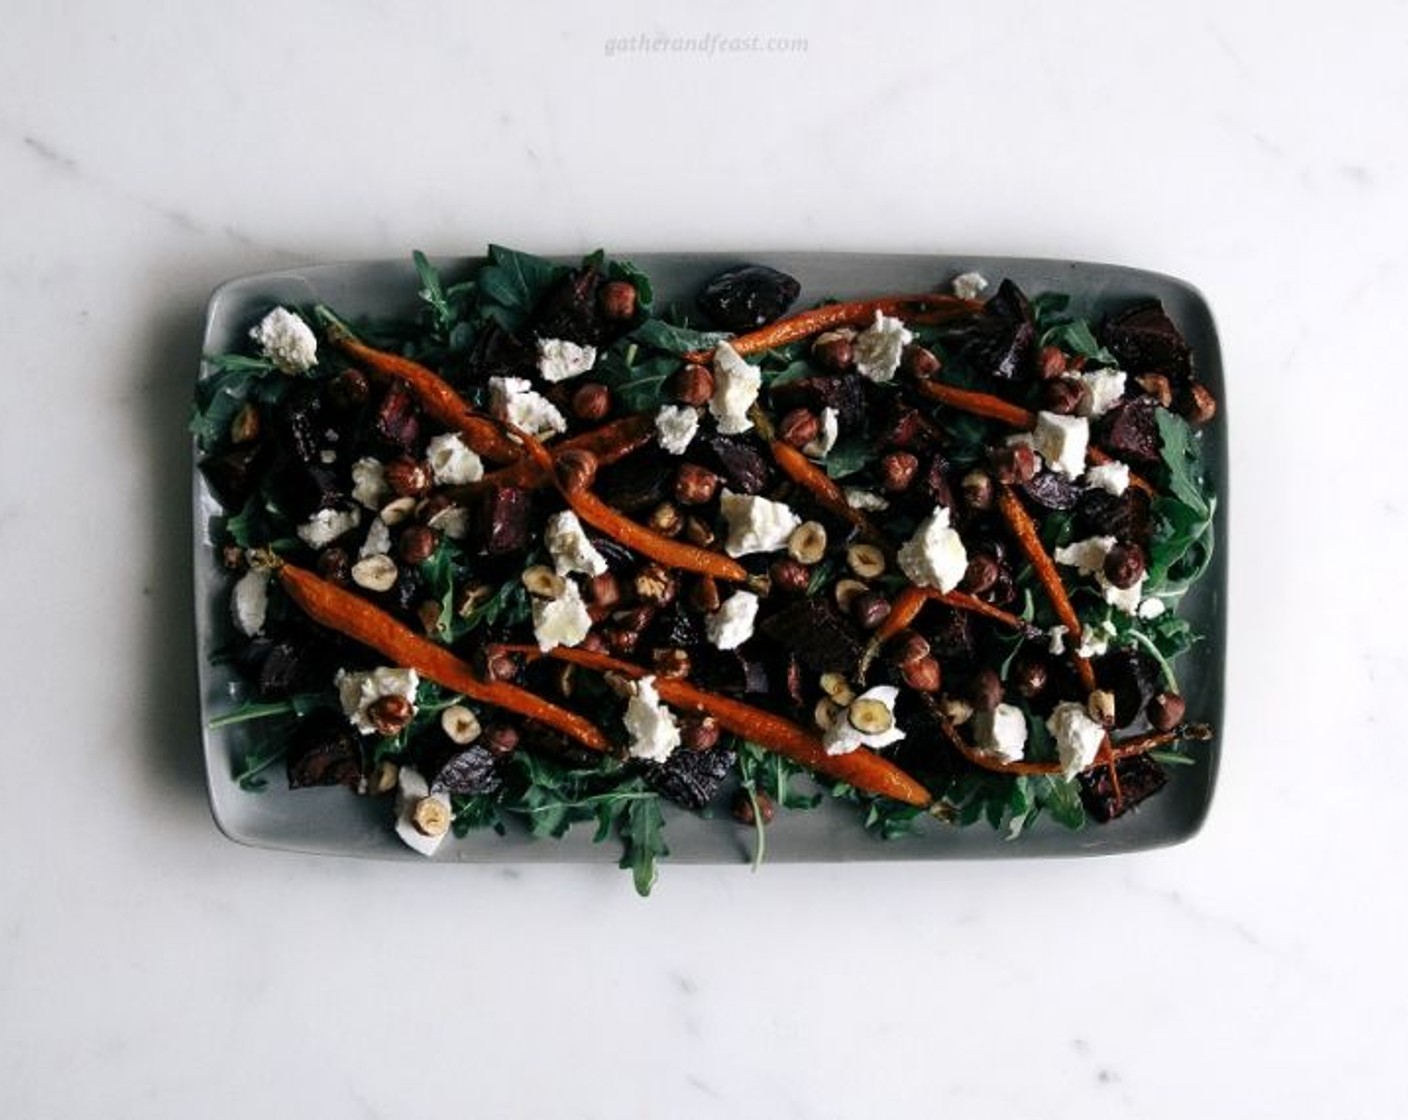 Roasted Beetroot & Carrot Salad with Chèvre